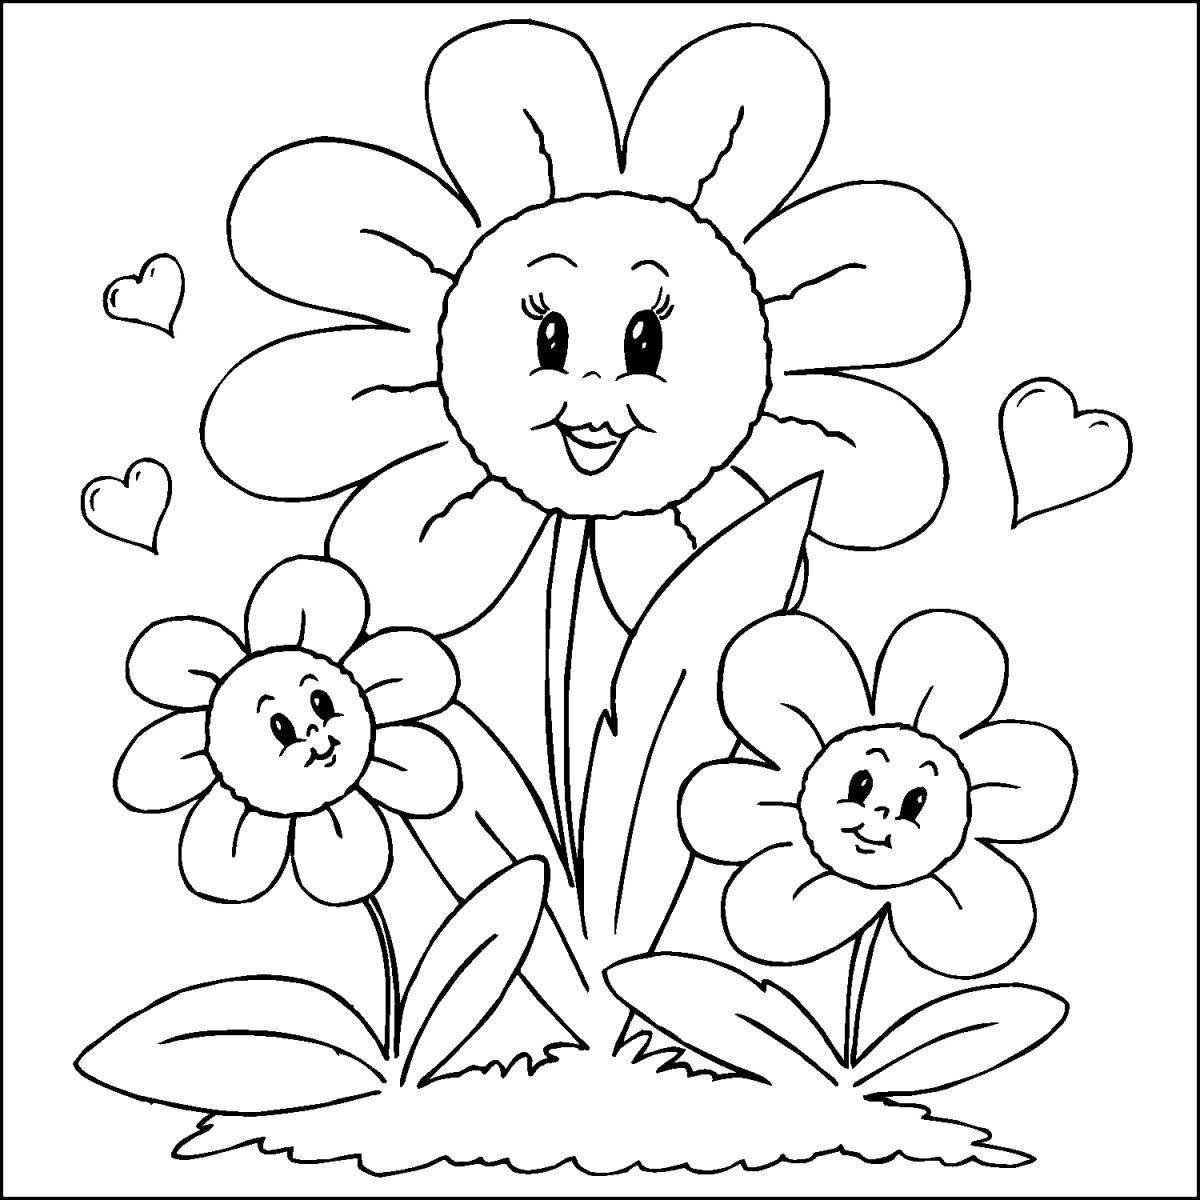 Fun flower coloring book for 5-6 year olds